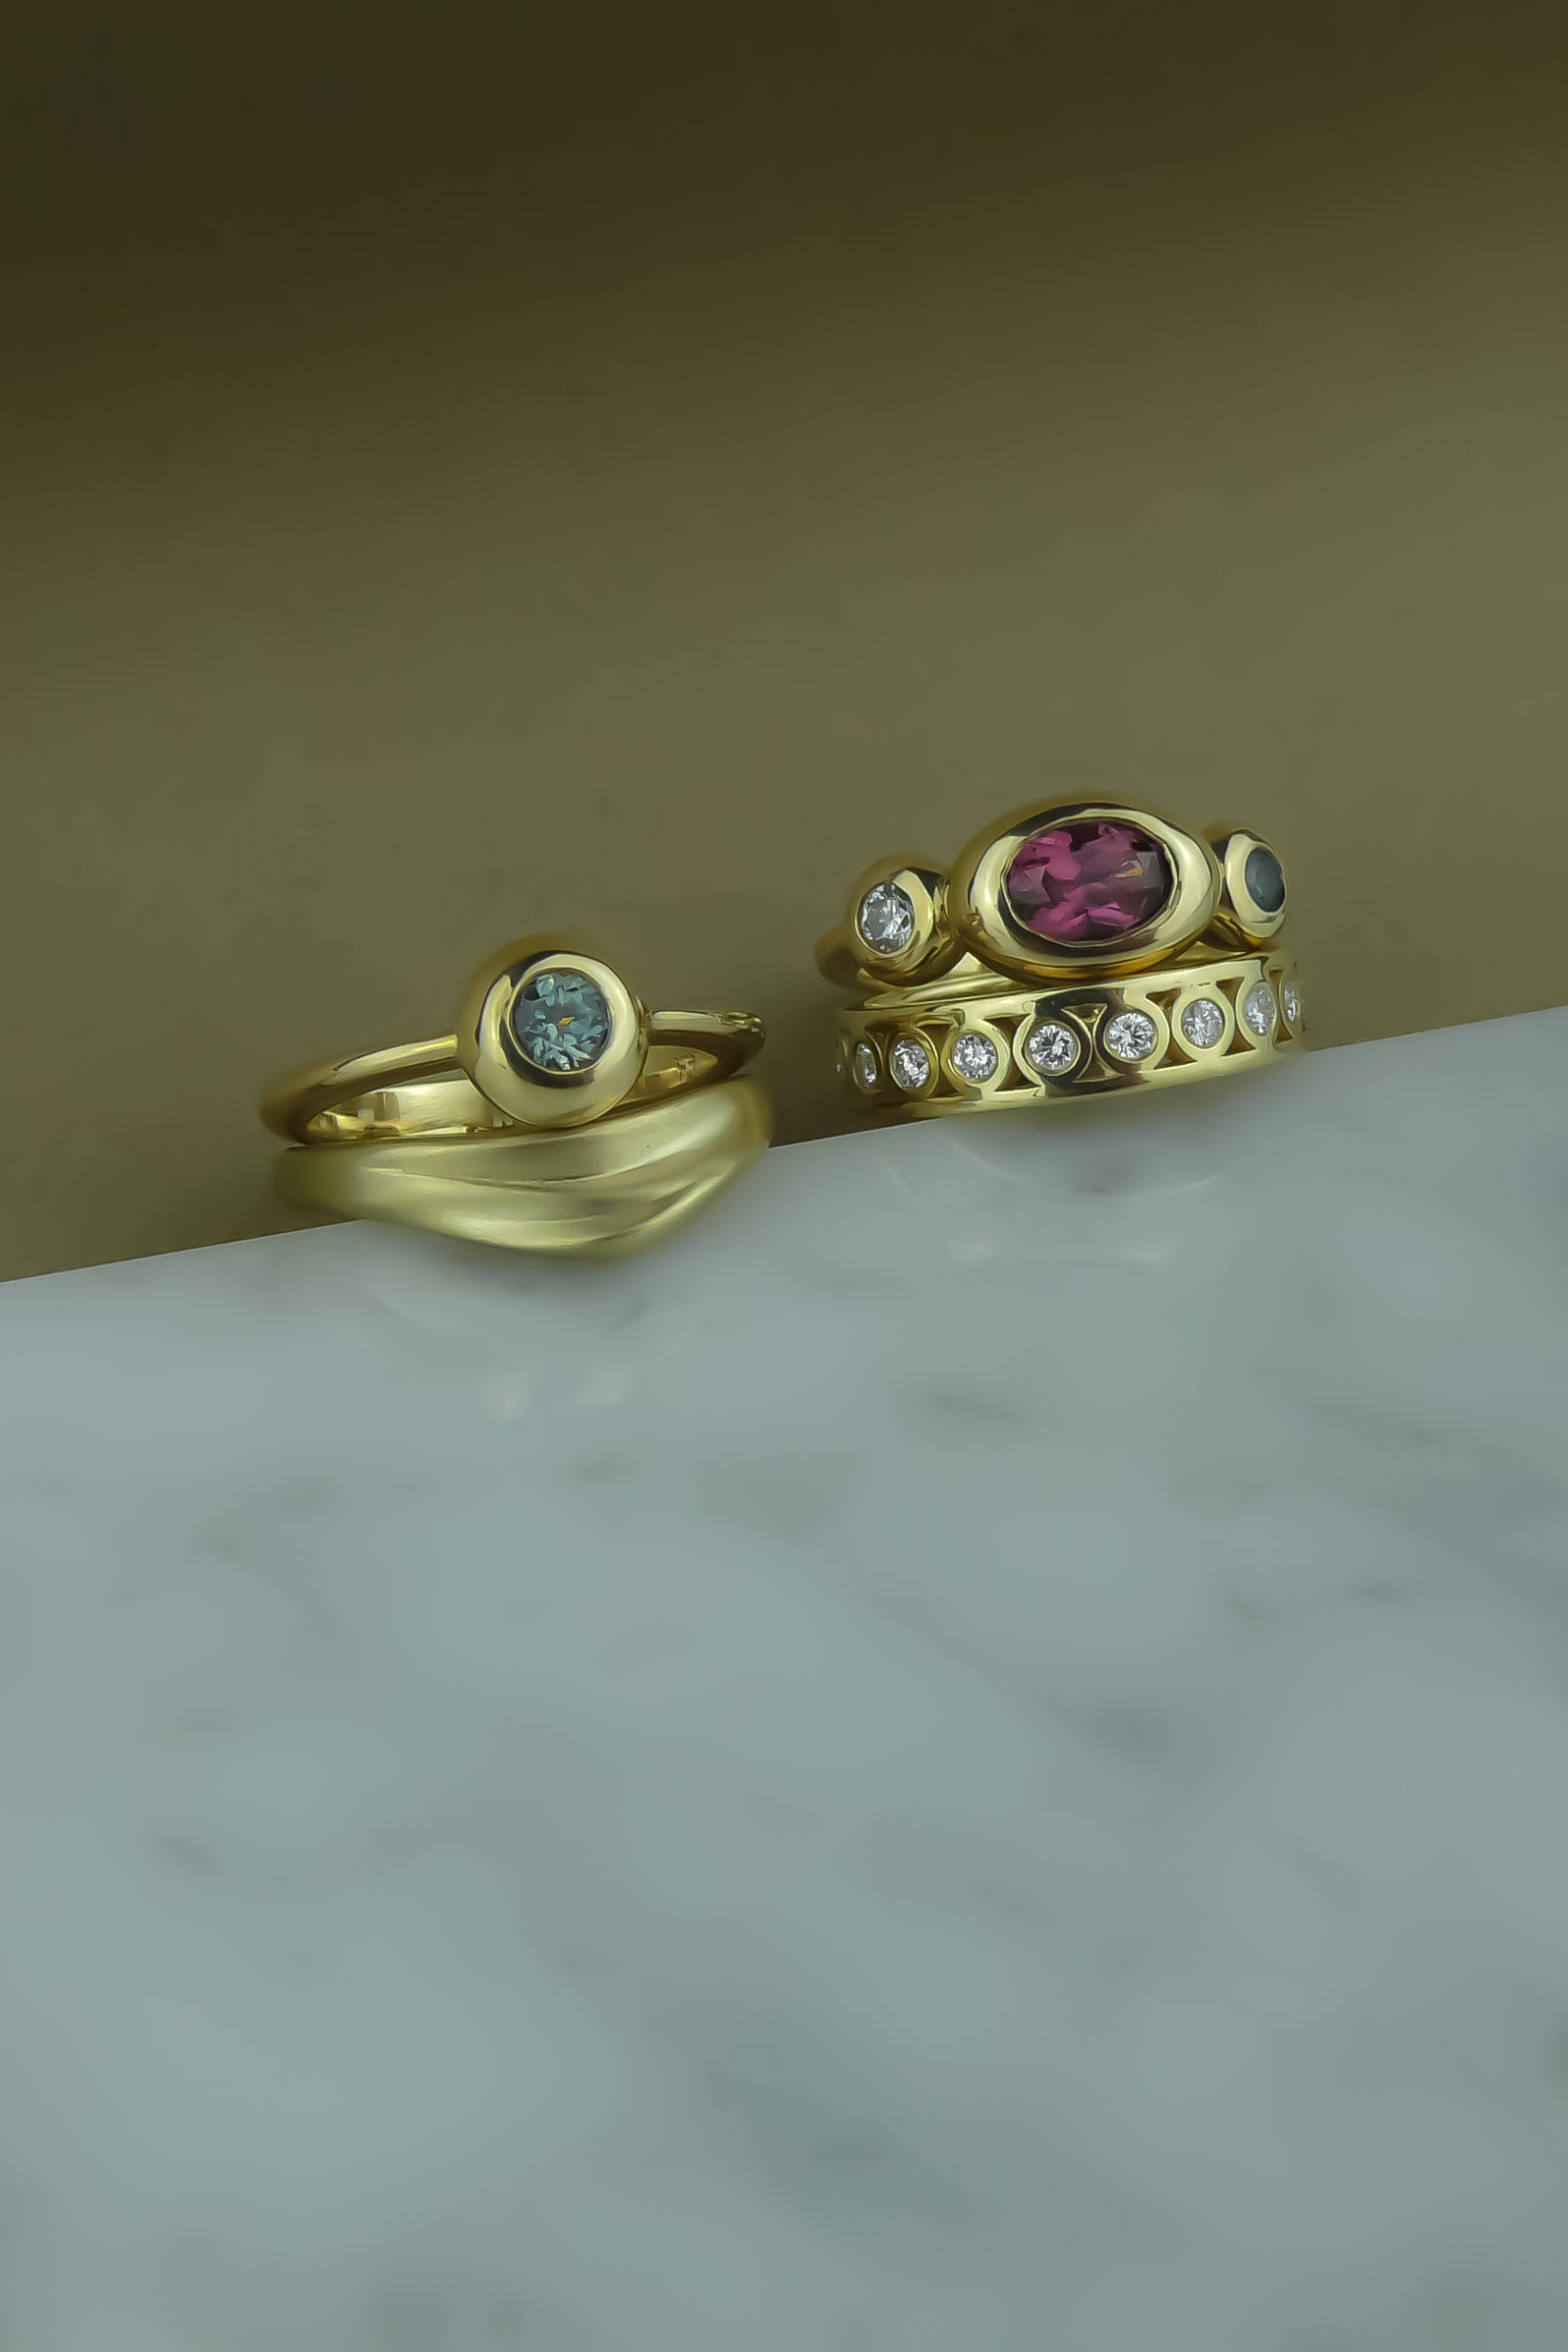 Foundation Trio Ring with garnet, teal sapphire, and diamond bezel set on a half round gold band and paired with a diamond eternity wedding band